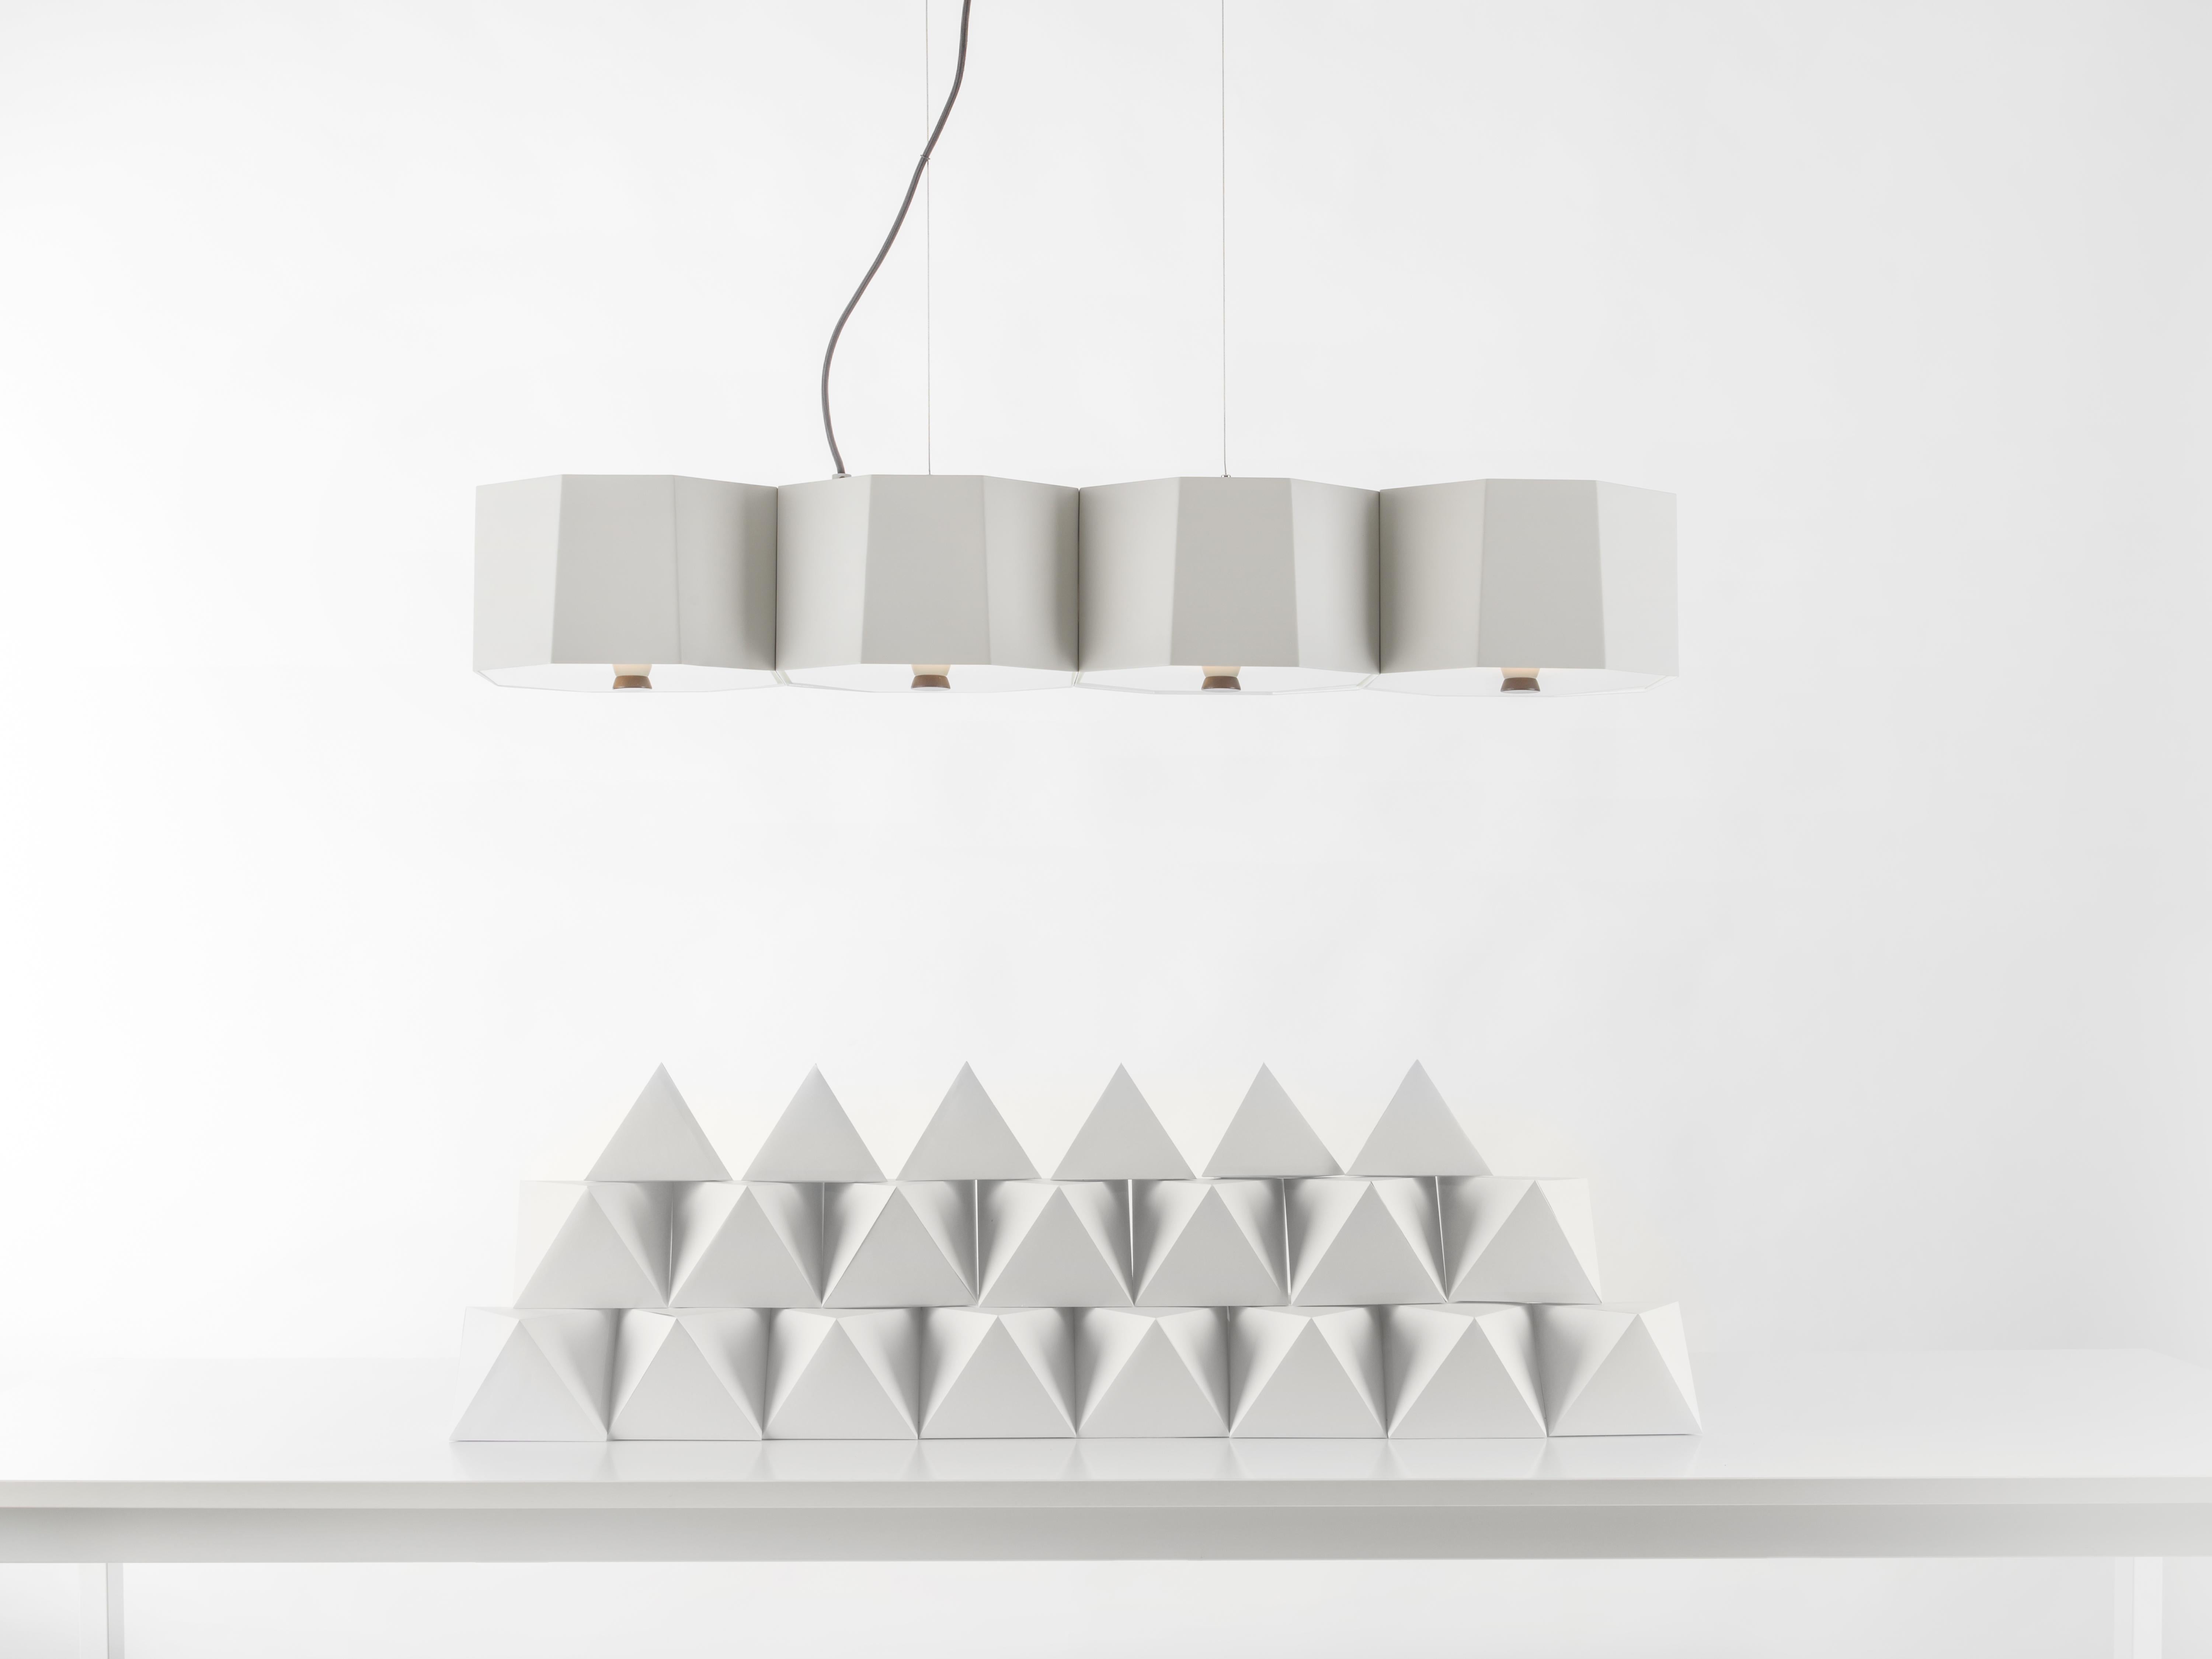 Zhe Pendant 4 is inspired by a wood from the Orient that is hard as rock. The metal lampshade is meticulously and deliberately hand welded together to resemble a cluster or rocks. Look closely and notice how each metal plate is a bit asymmetrical